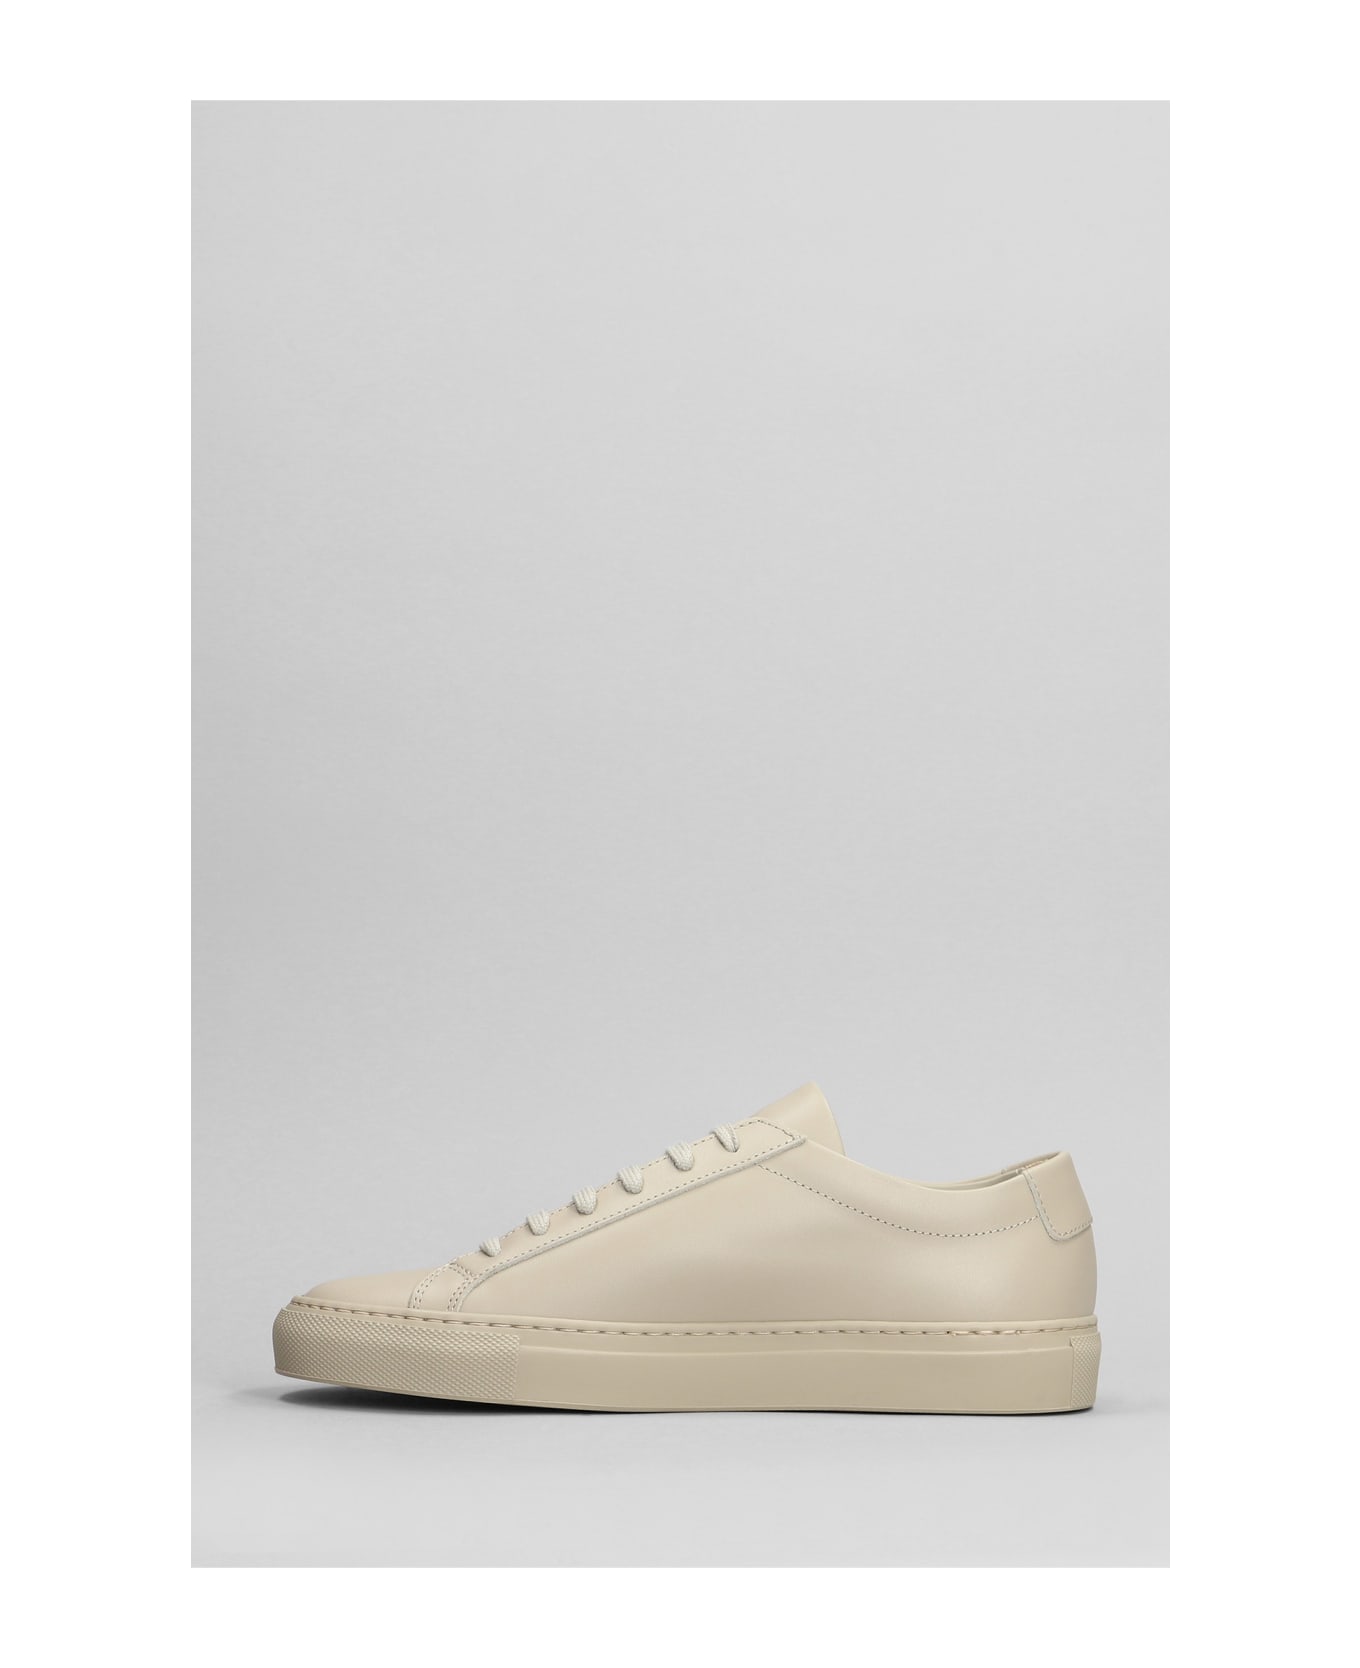 Common Projects Original Achilles Sneakers In Taupe Leather - taupe スニーカー